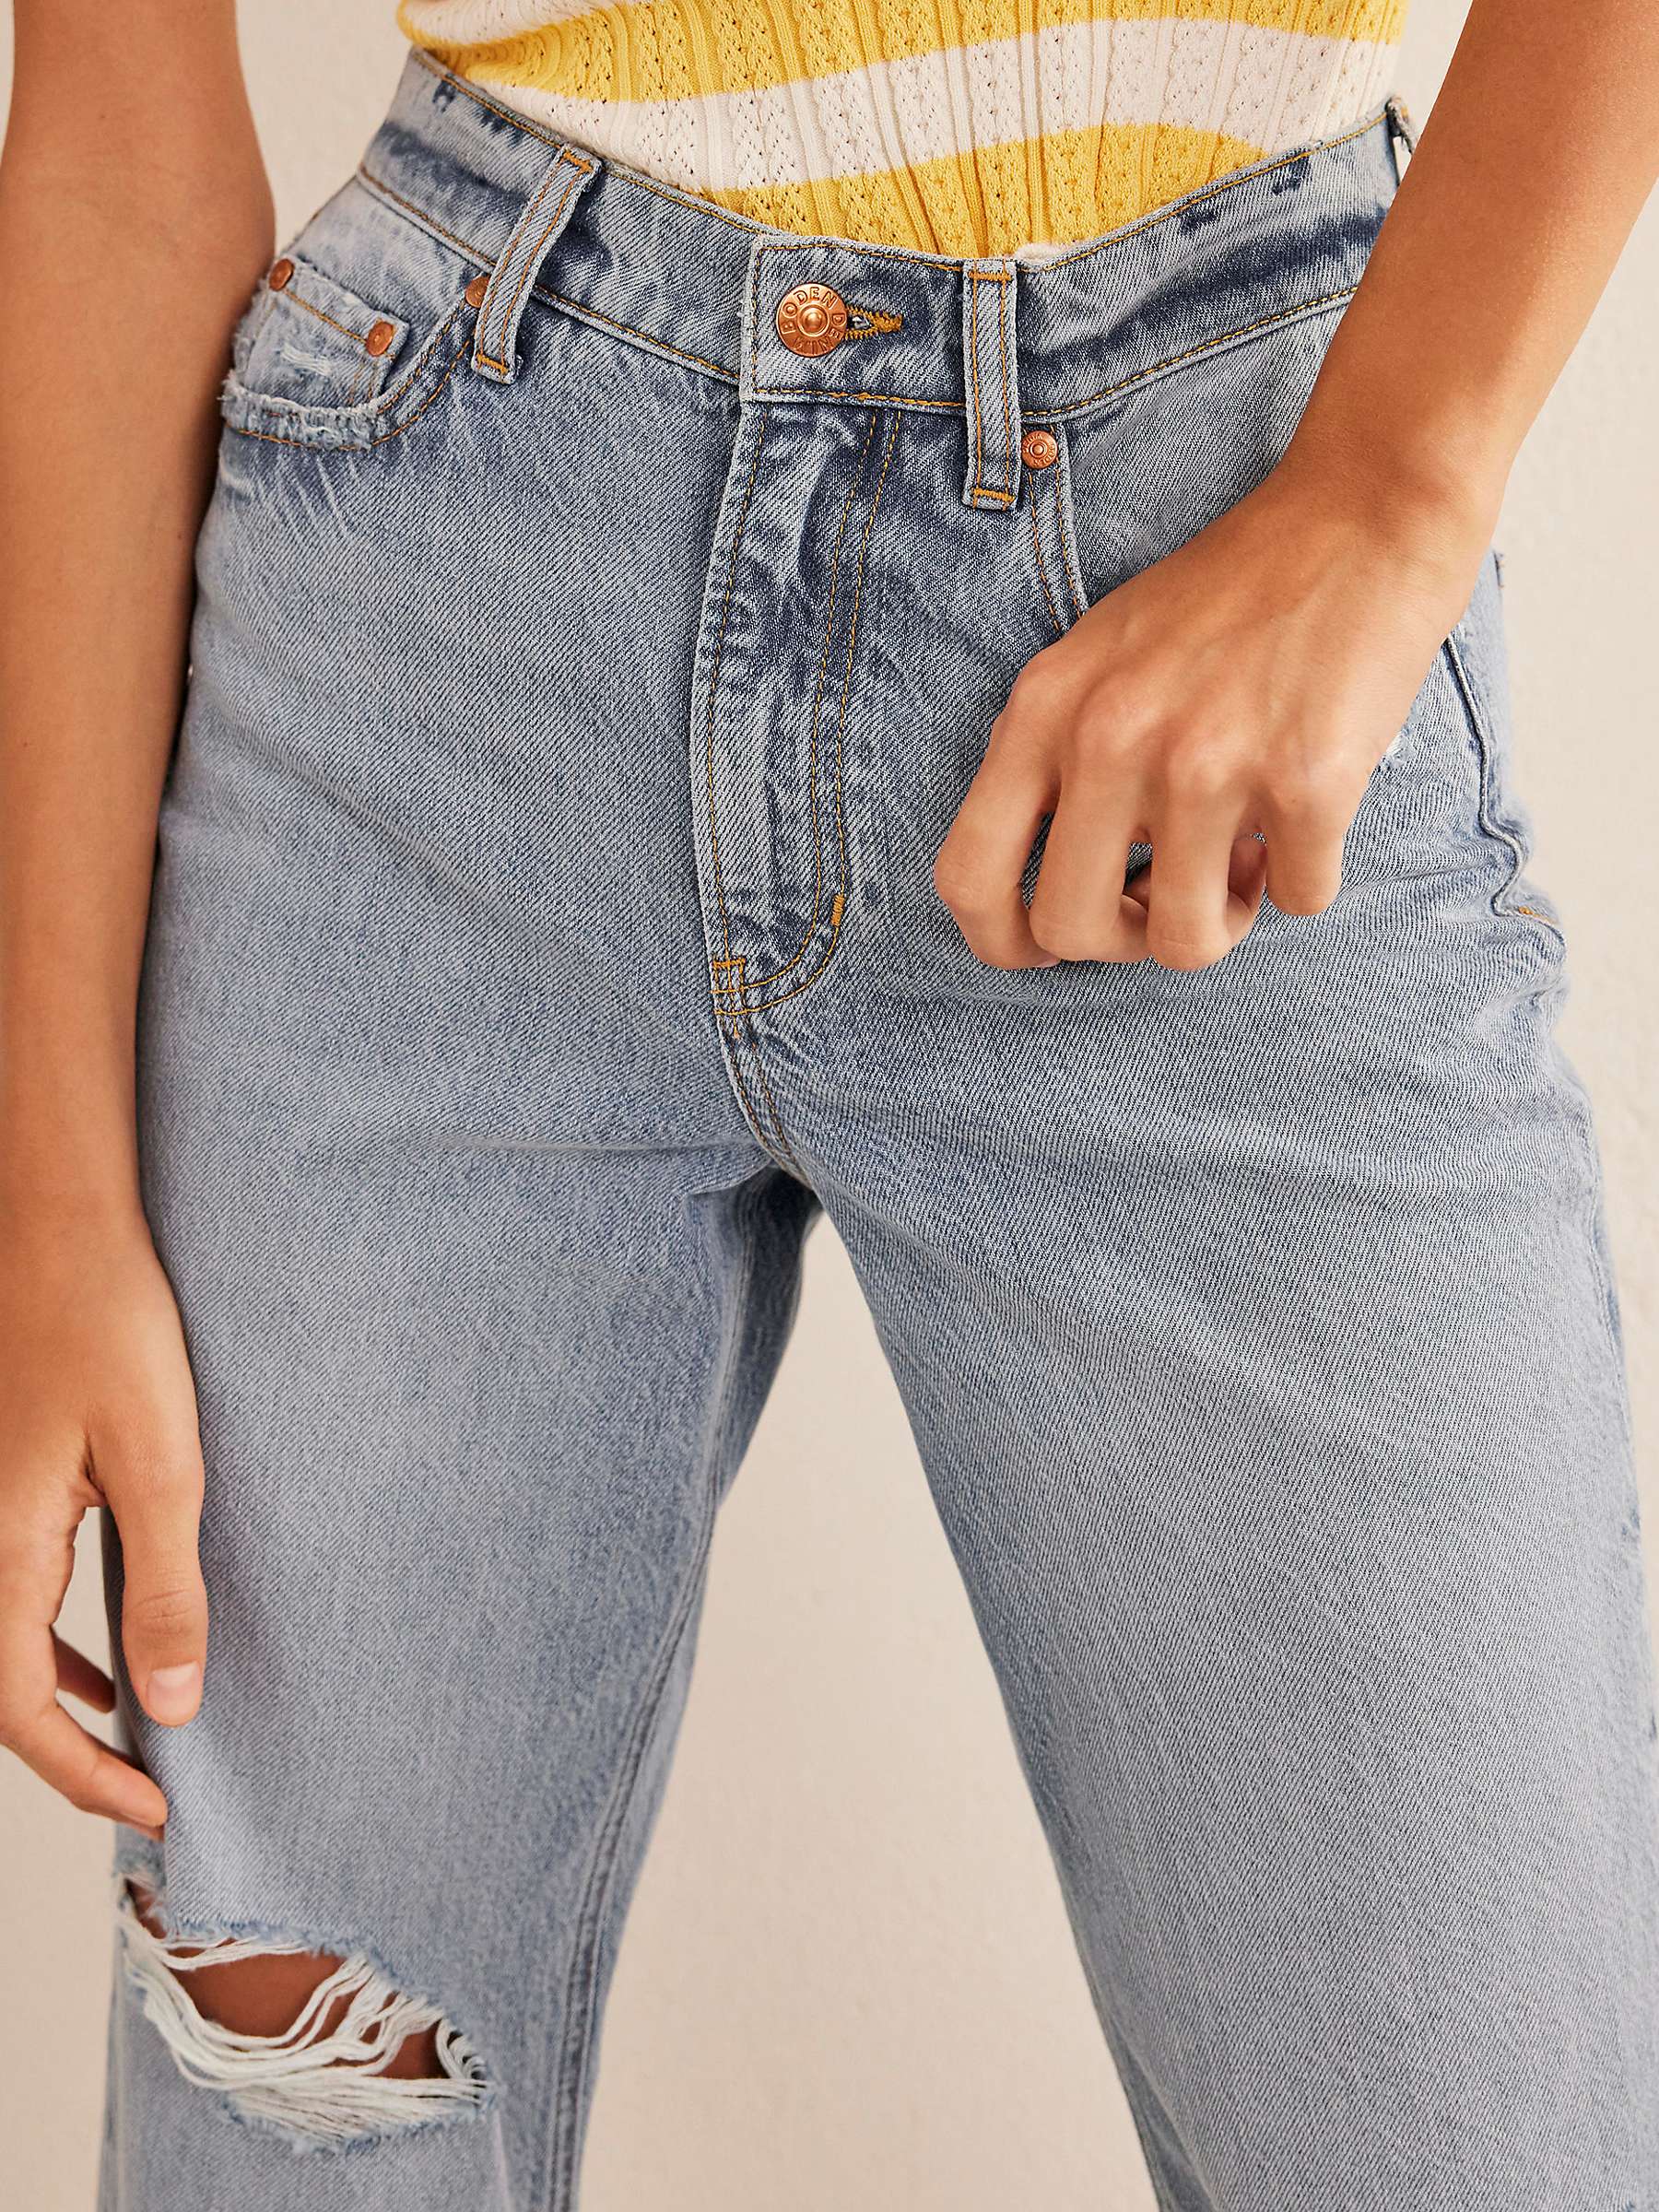 Buy Boden Distressed Cropped Loose Fit Jeans, Mid Wash Online at johnlewis.com